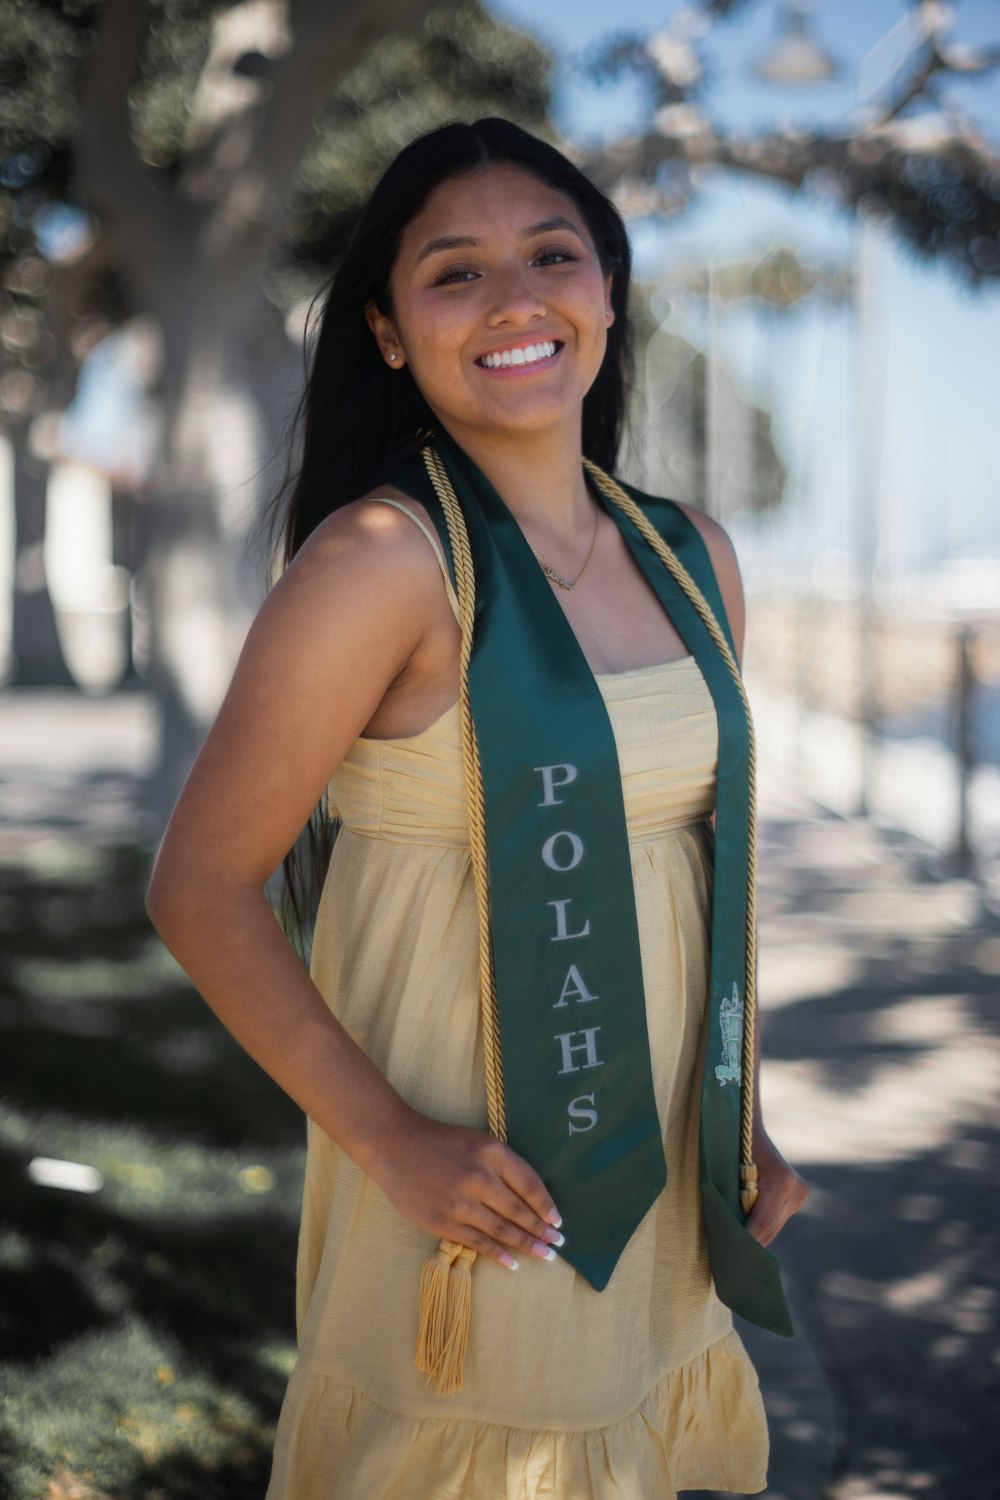 a woman wearing a green sash and smiling